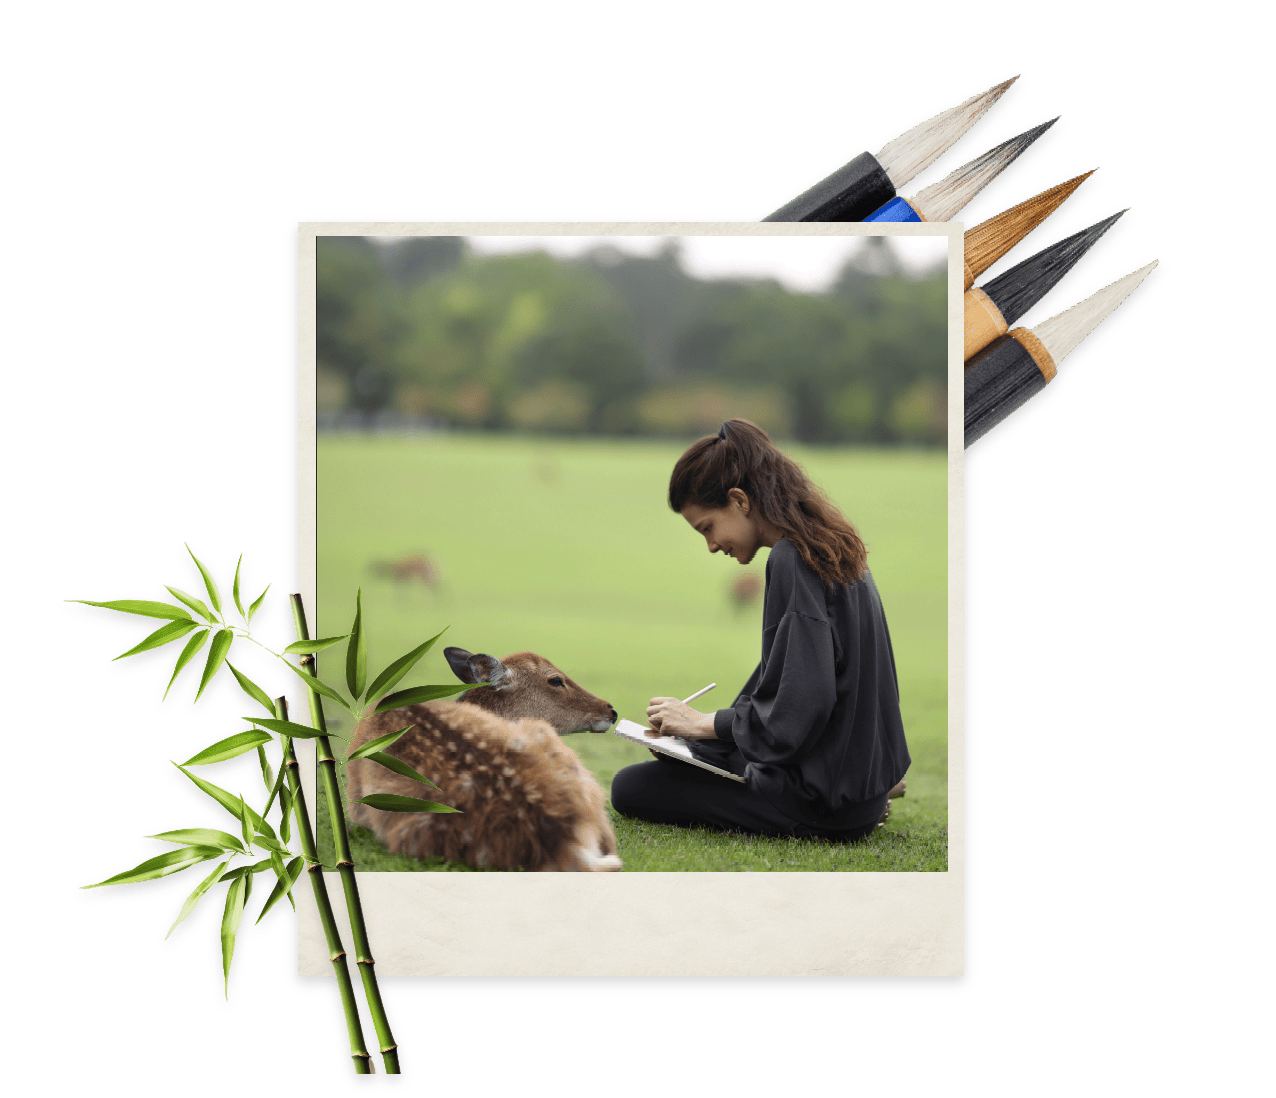 A woman kneels in the grass of a meadow while sketching on a sketchpad as a deer relaxes by her side, paired with pencils in one corner and bamboo shoots in the other.